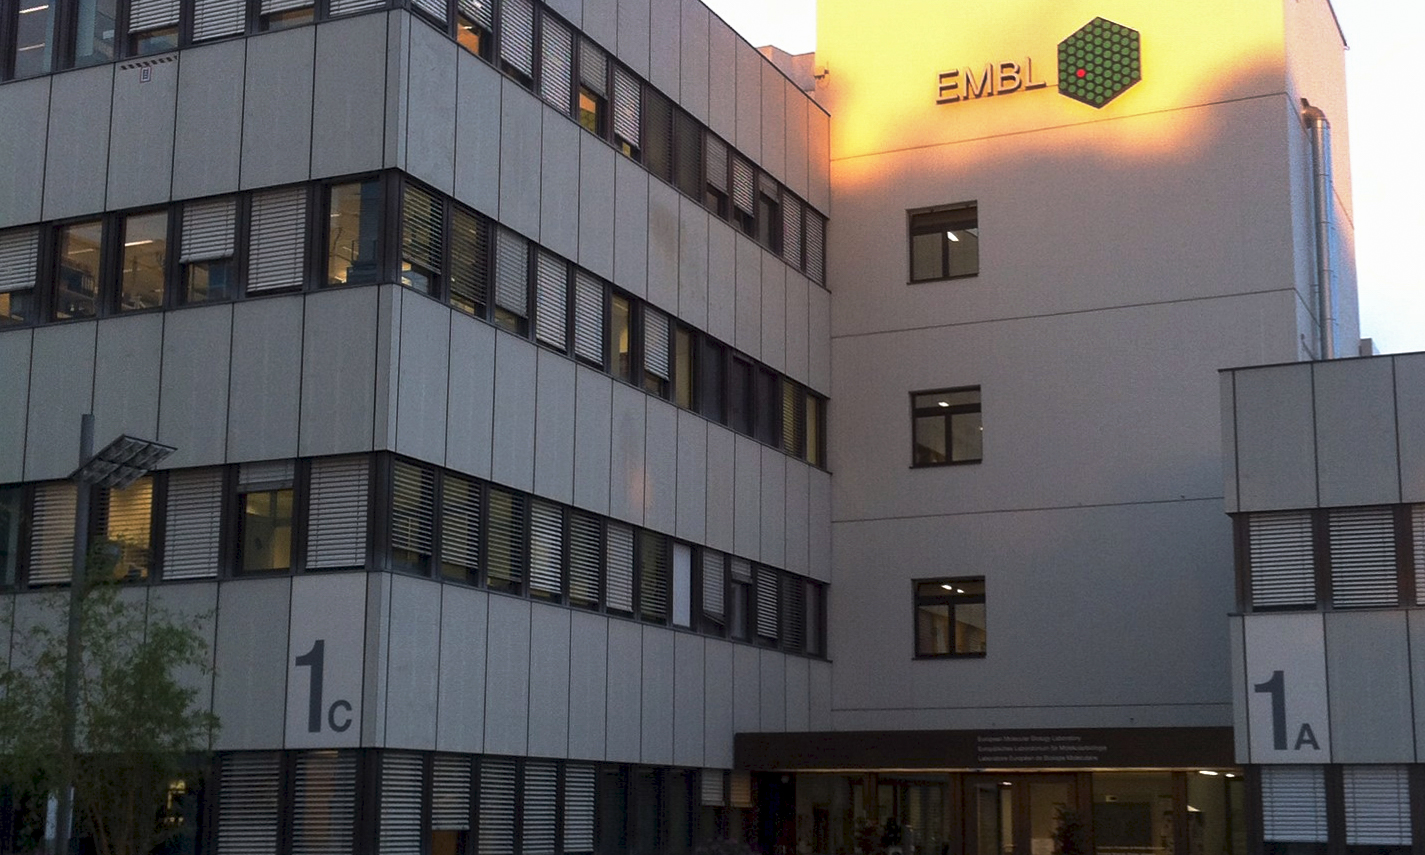 EMBL Heidelberg's main building, the top of the façade lit up by sunlight.